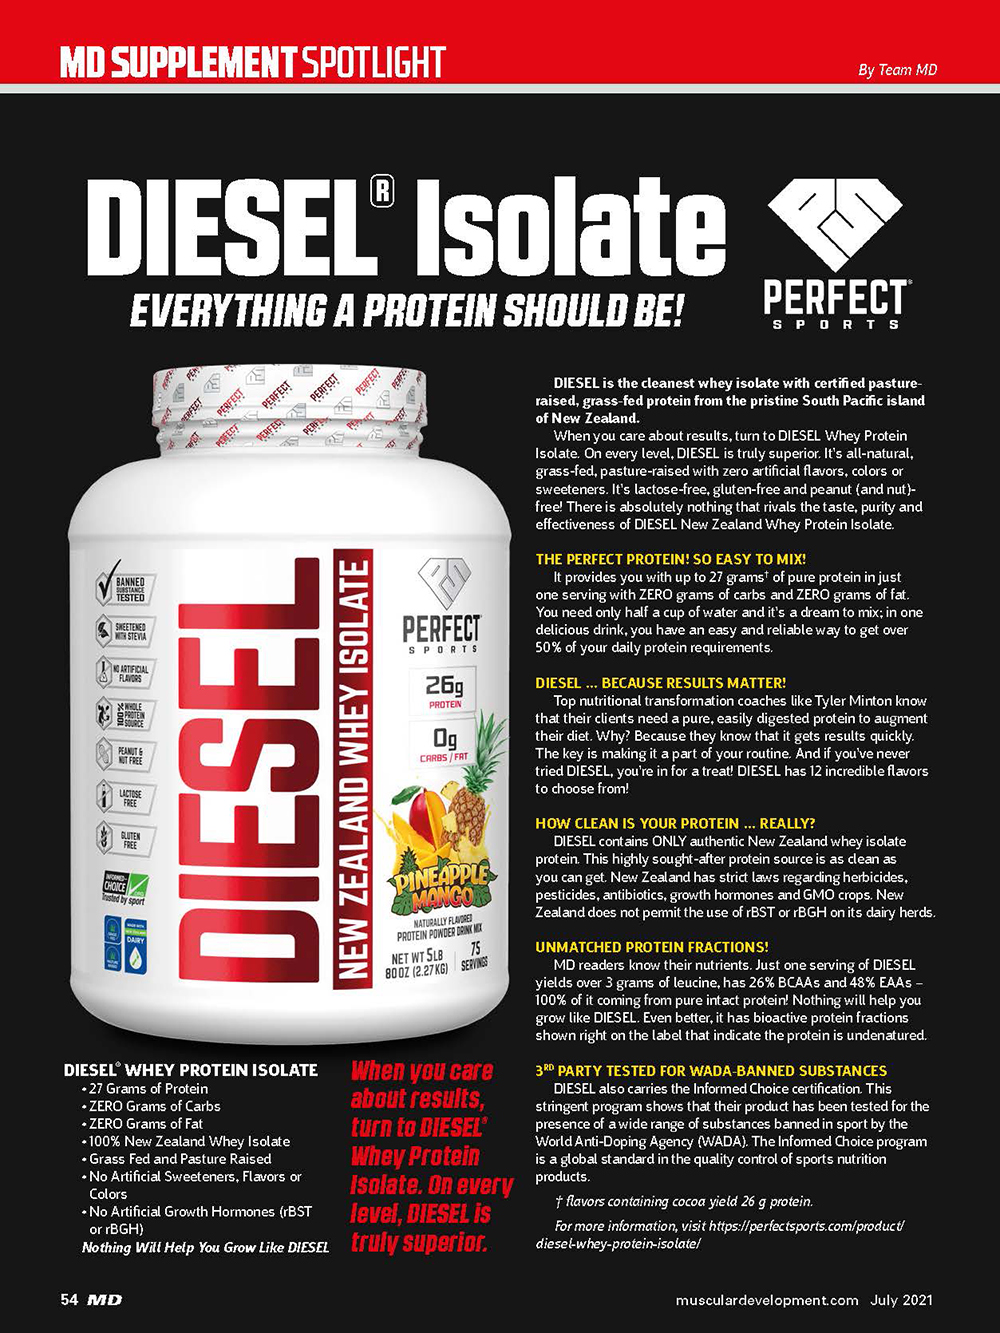 Muscular Development Product Spotlight Review of DIESEL New Zealand Whey Protein PERFECT Sports